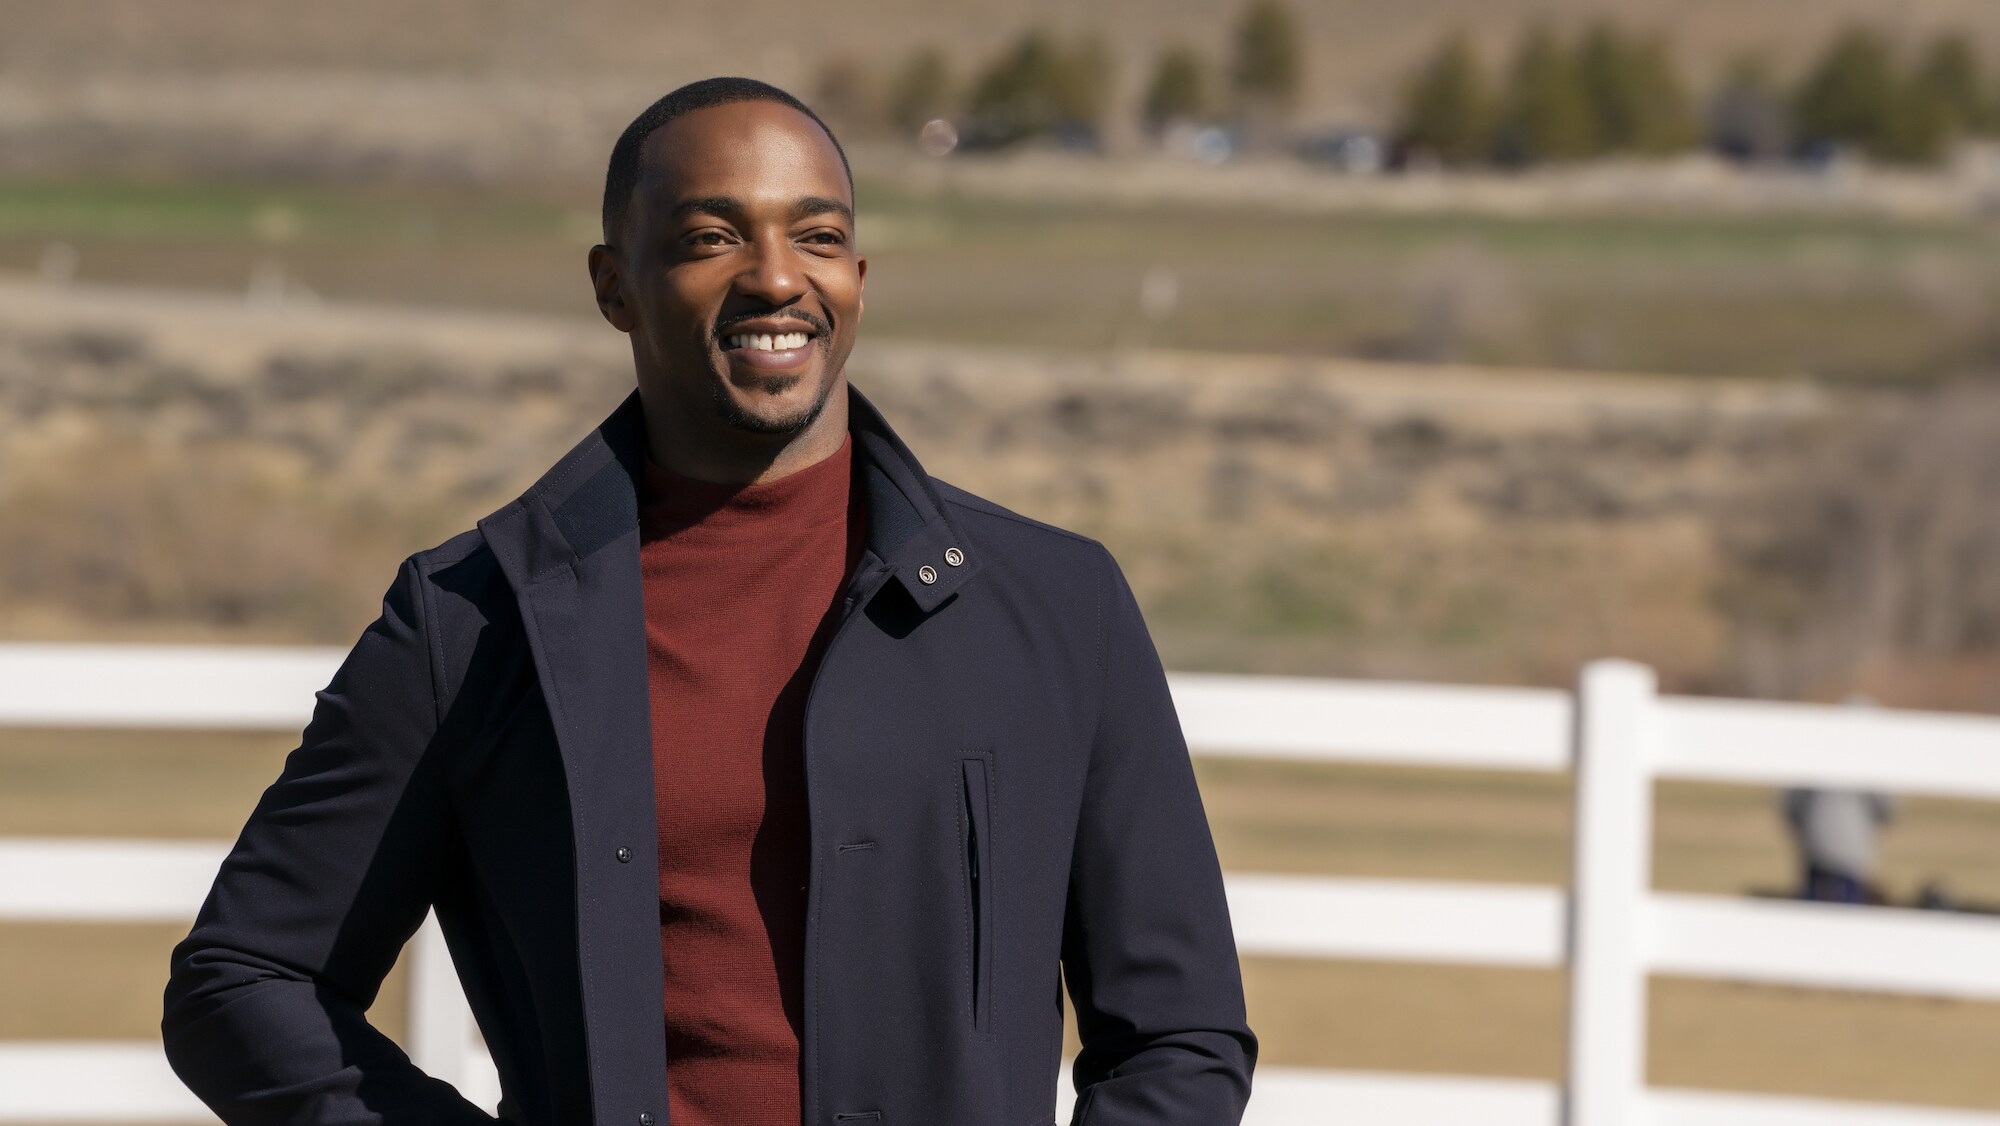 Anthony Mackie attends the Reno reveal as seen on Disney's RENNERVATIONS. (Disney/Katrina Marcinowski)